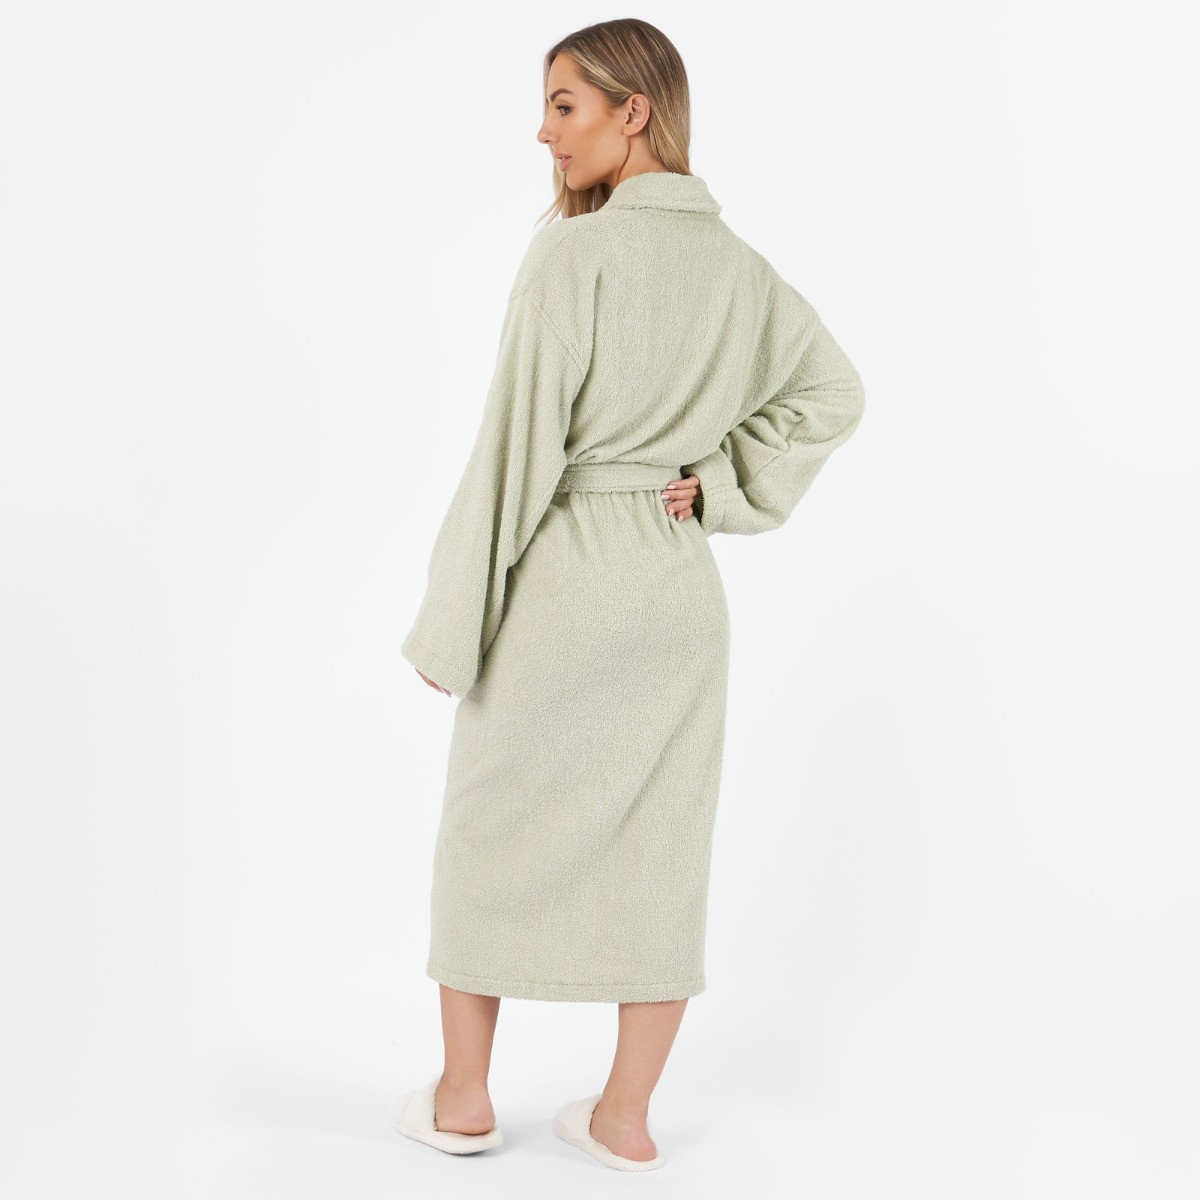 Brentfords 100% Cotton Towelling Dressing Gown, Adults - Sage Green>